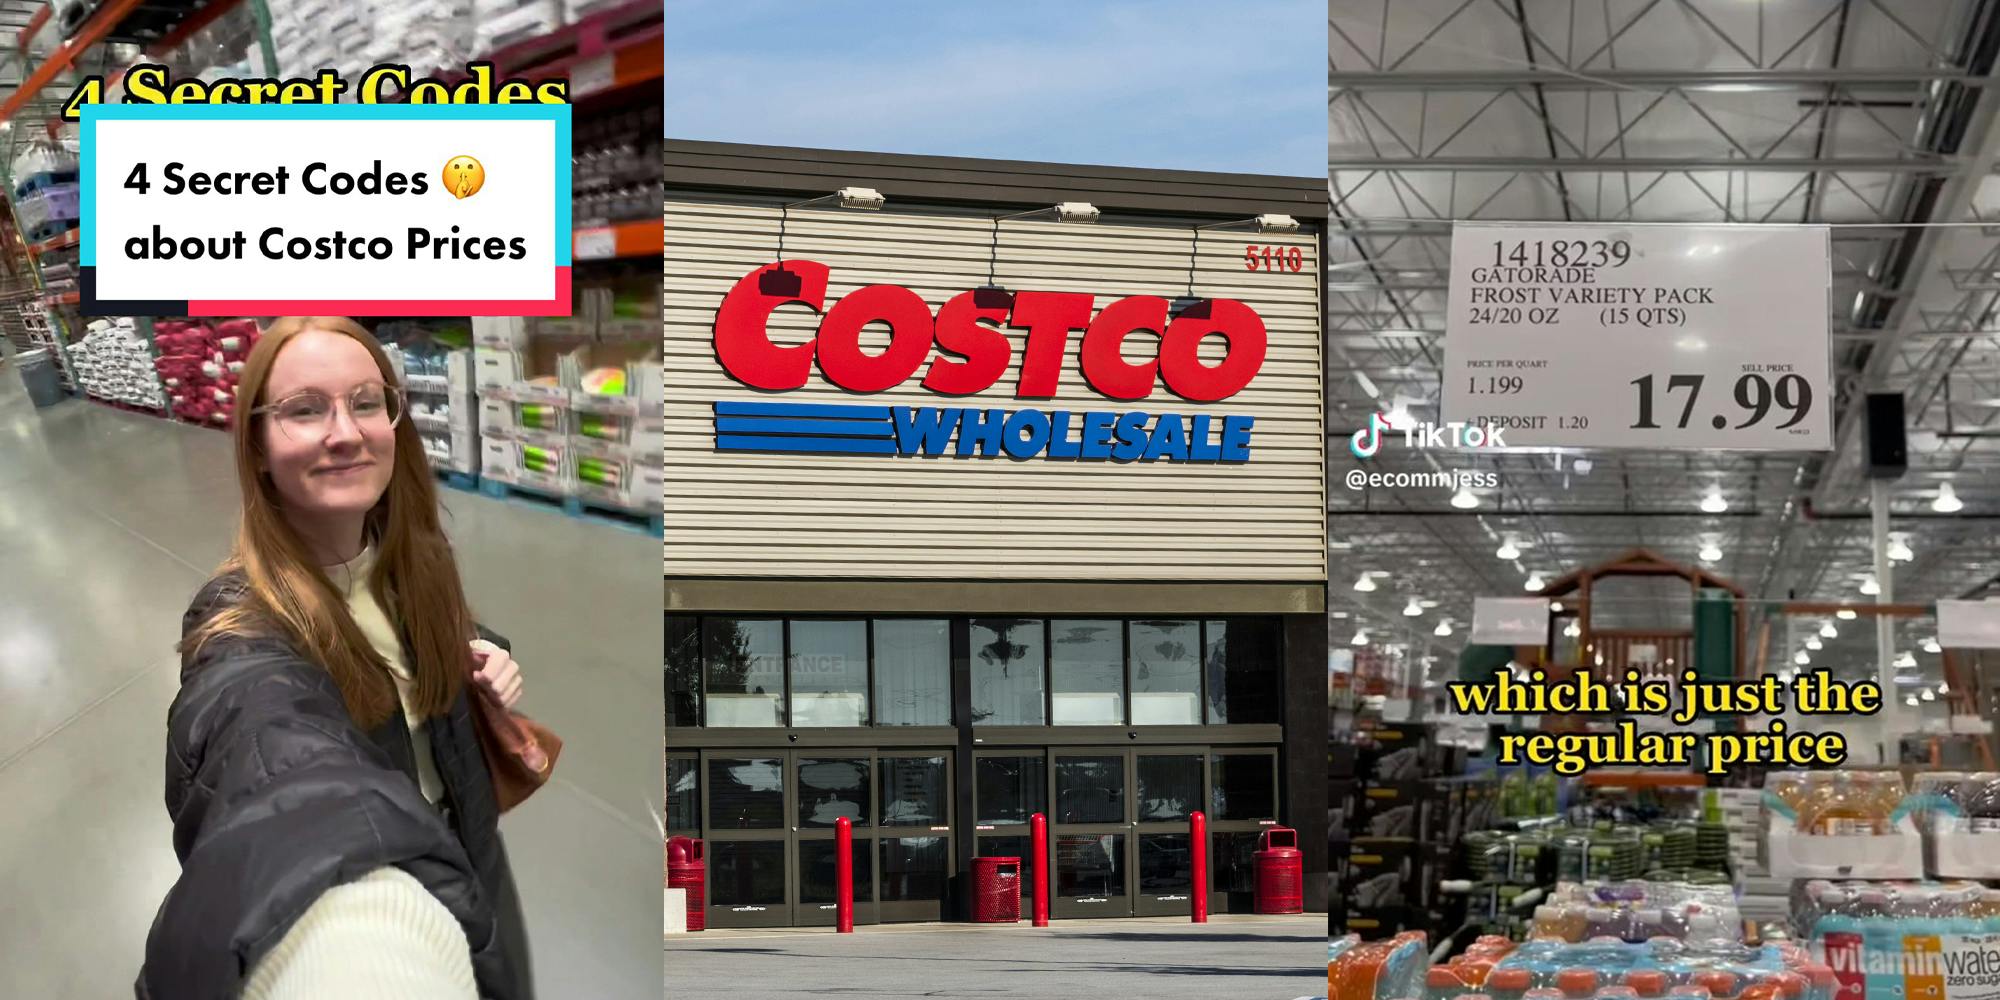 Shopper Shares the 4 Secret Price Codes at Costco